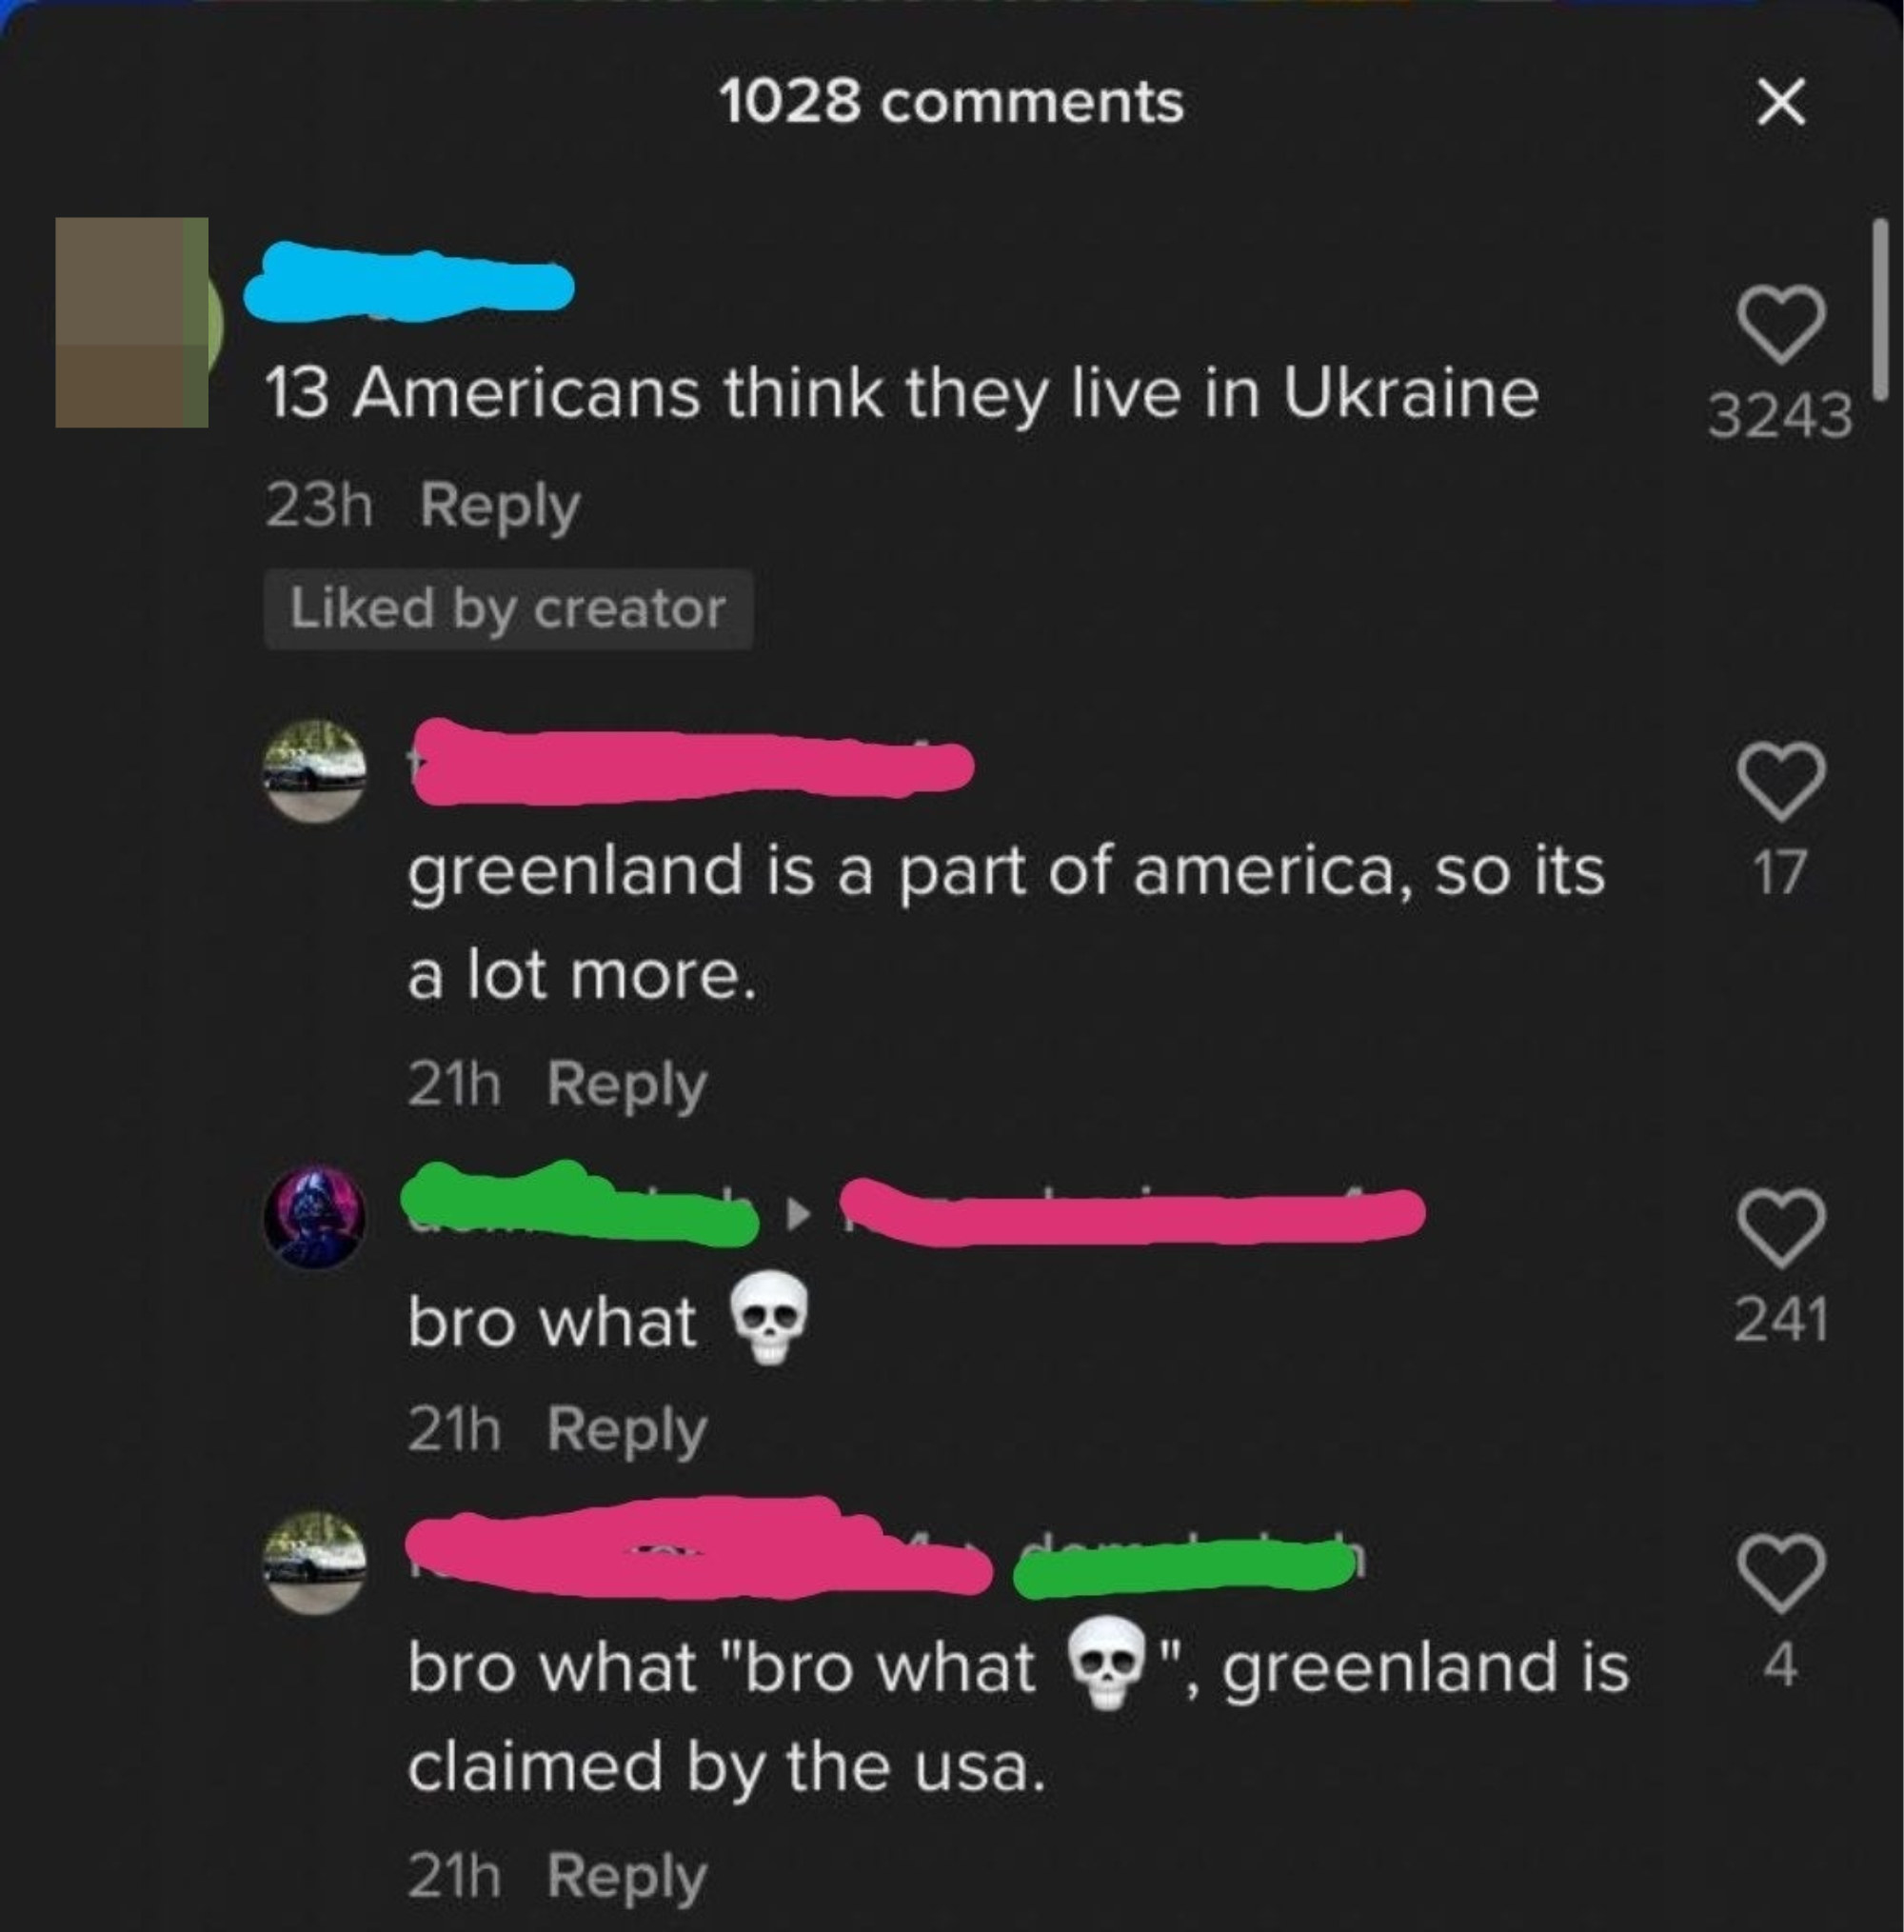 american who says that greenland is claimed by the usa